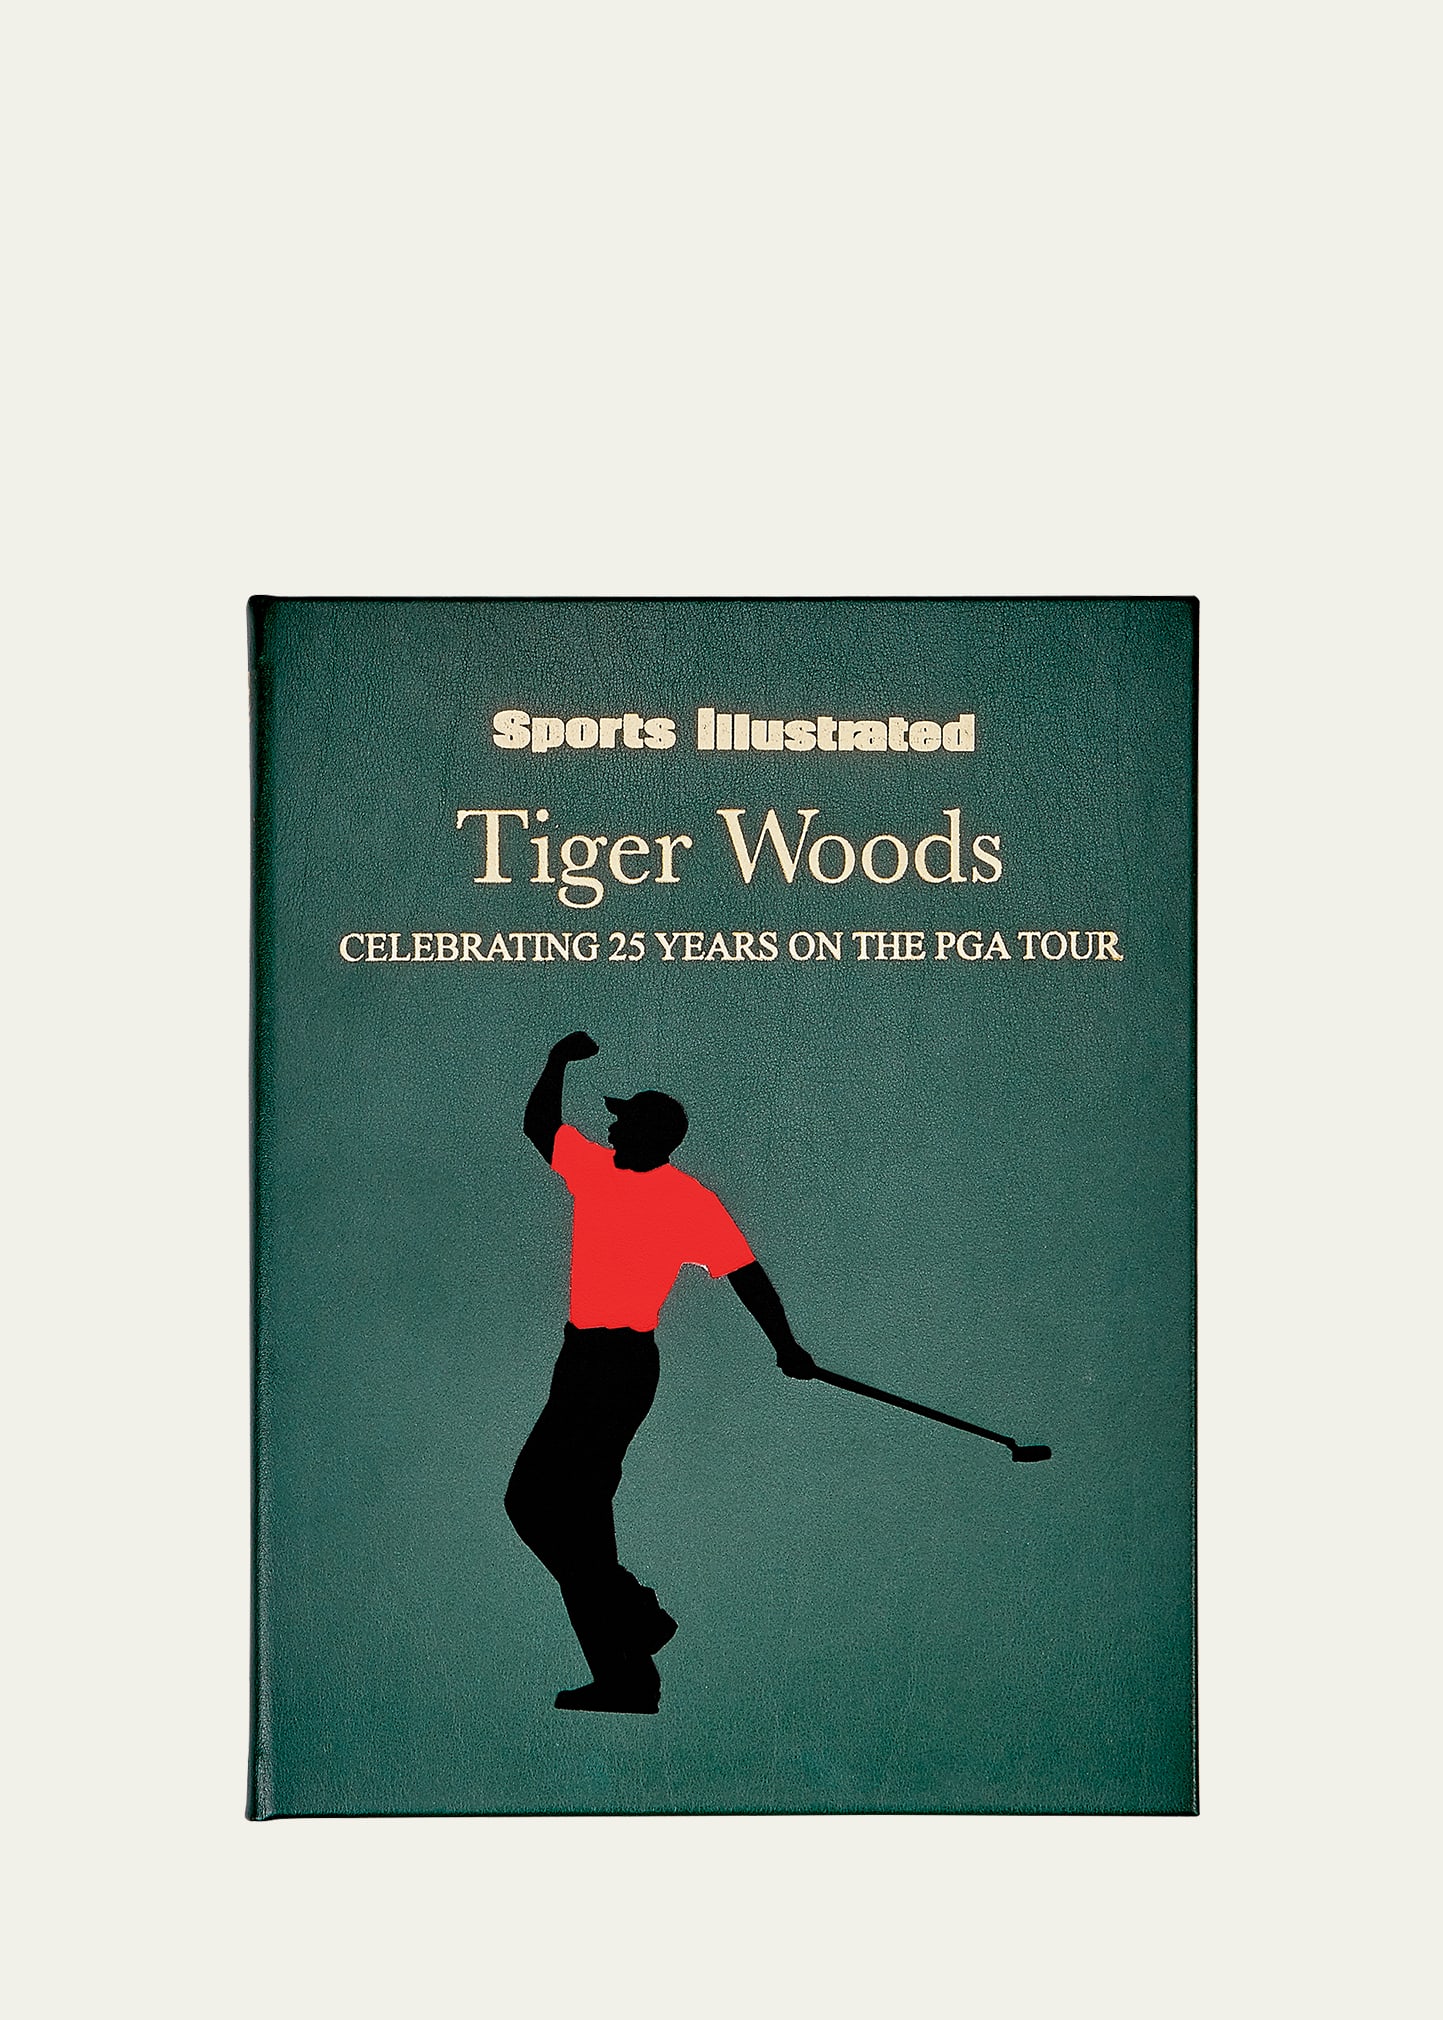 Tiger Woods - Celebrating 25 Years on the PGA Tour Personalizable Book